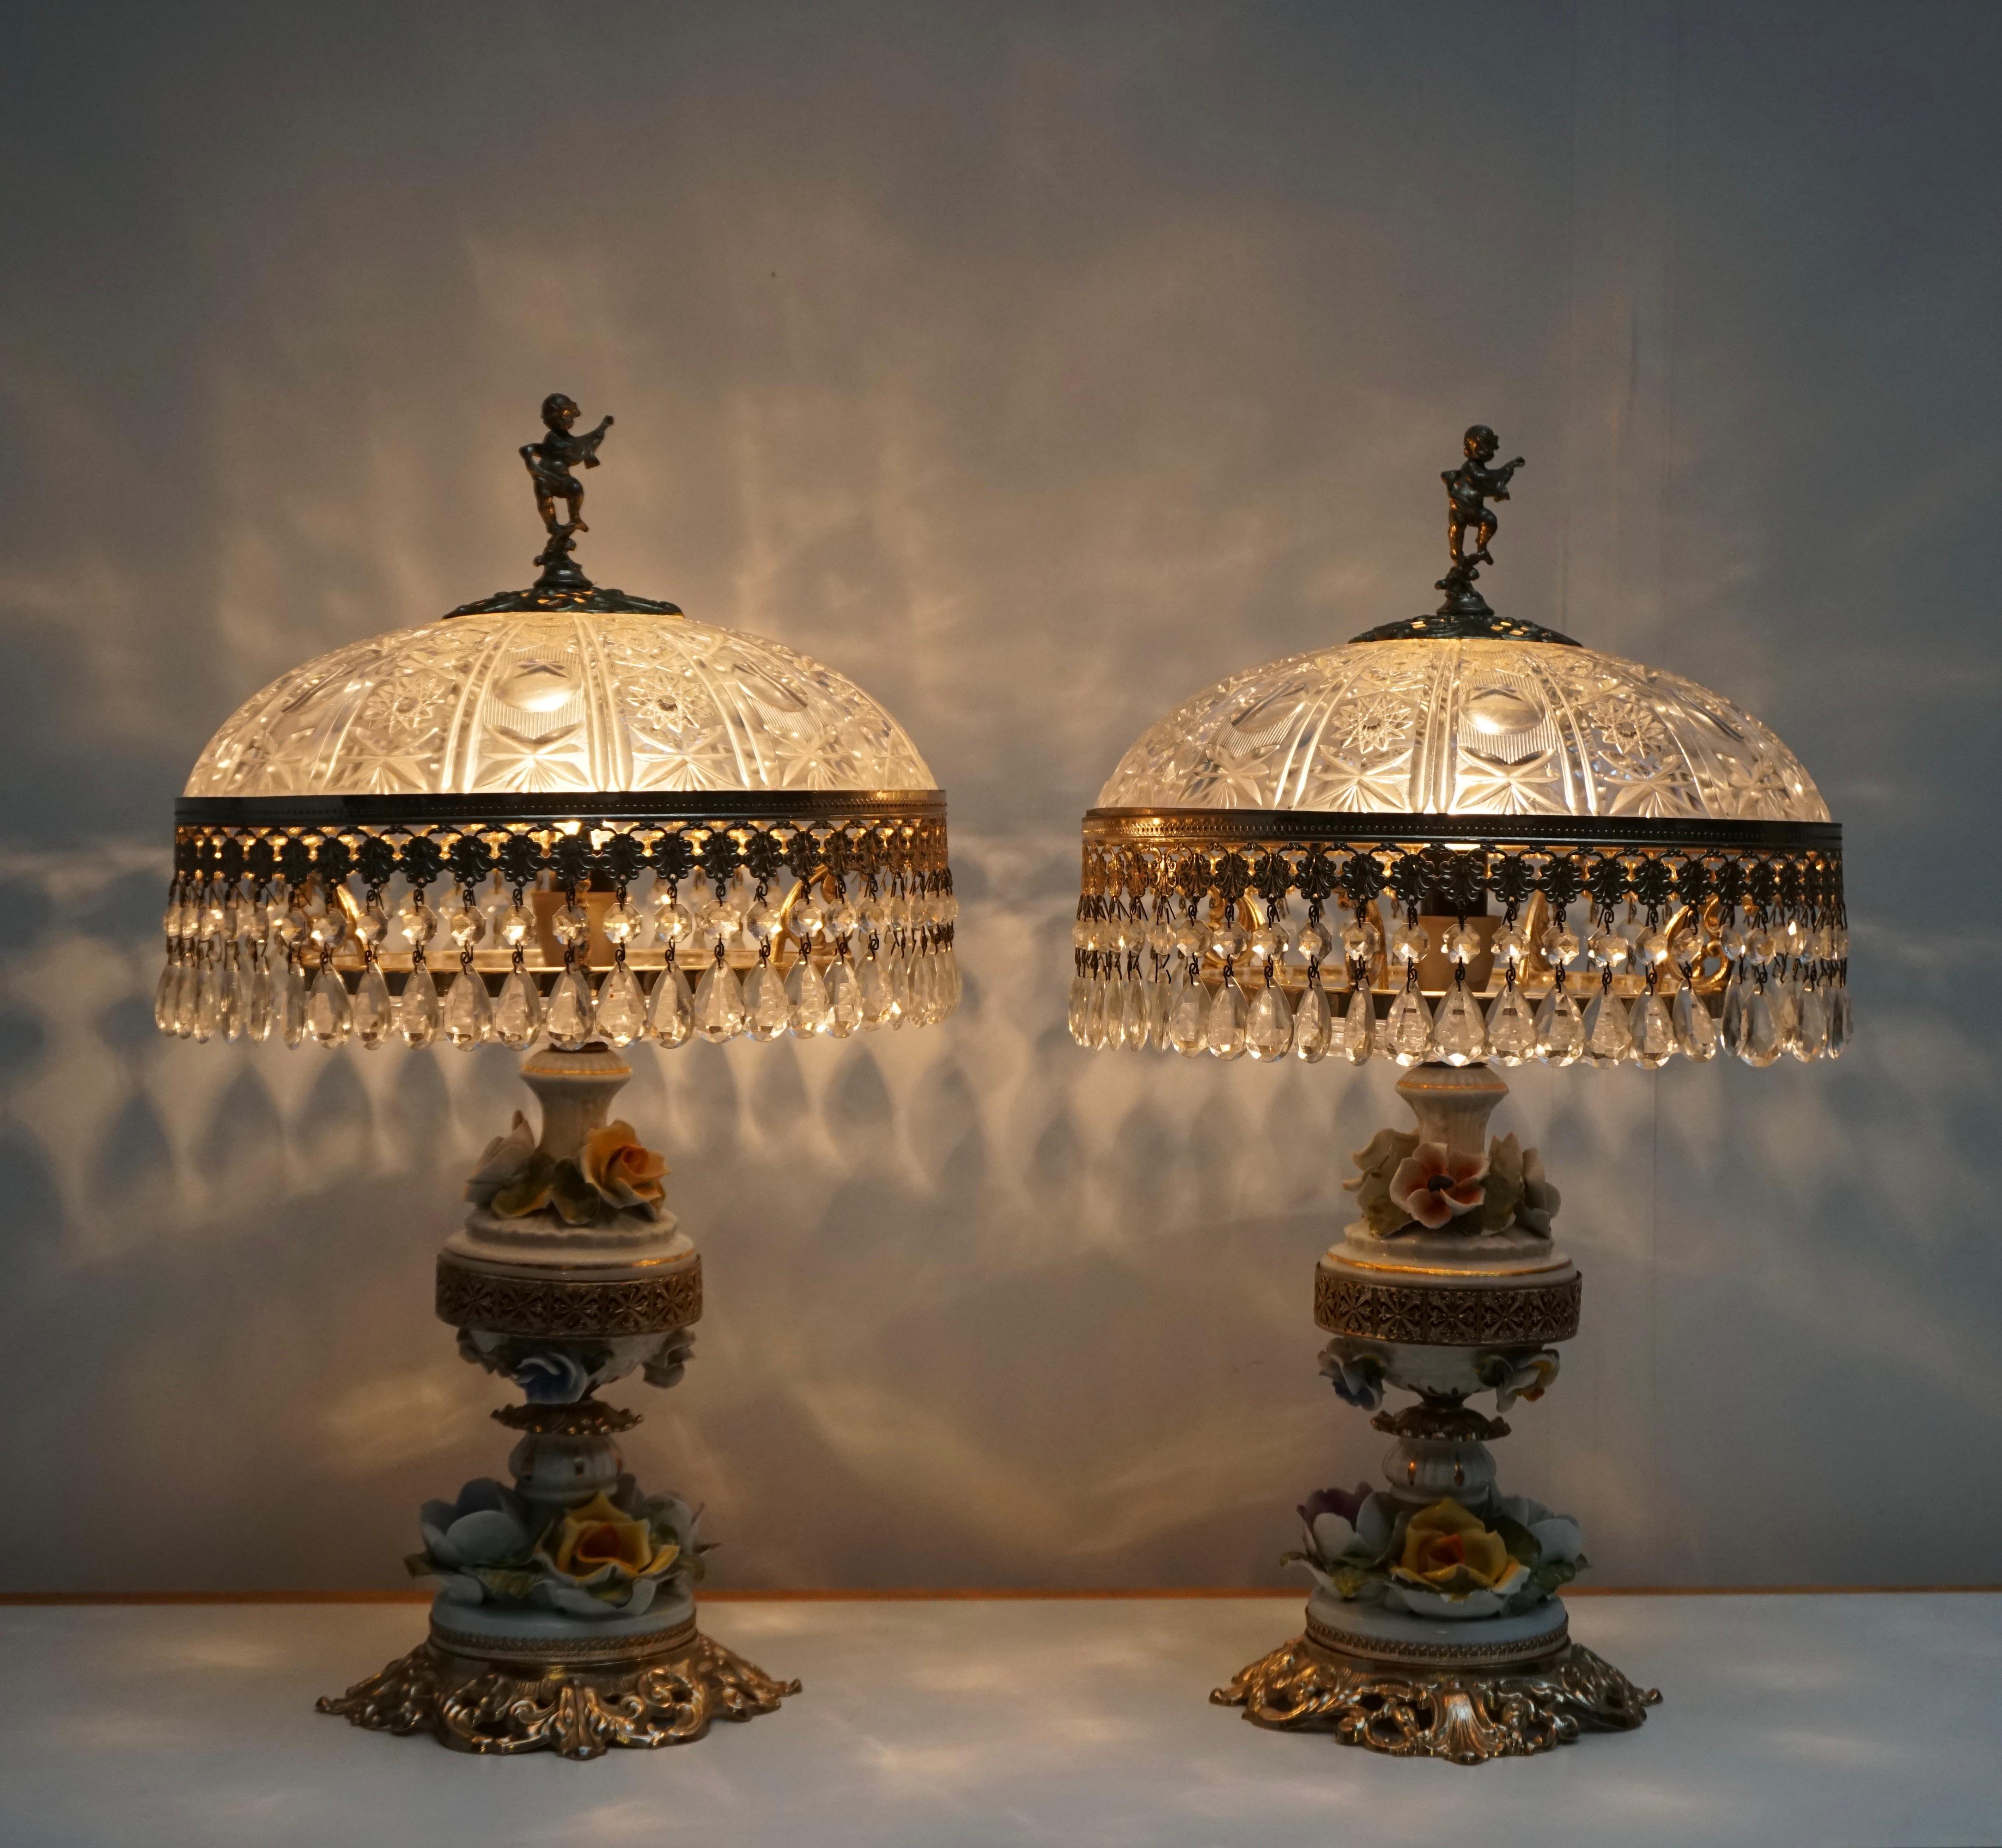 Two table lamps with a crystal shade and brass base decorated with porcelain flowers.
Measures: Diameter 32 cm.
Height 52 cm.